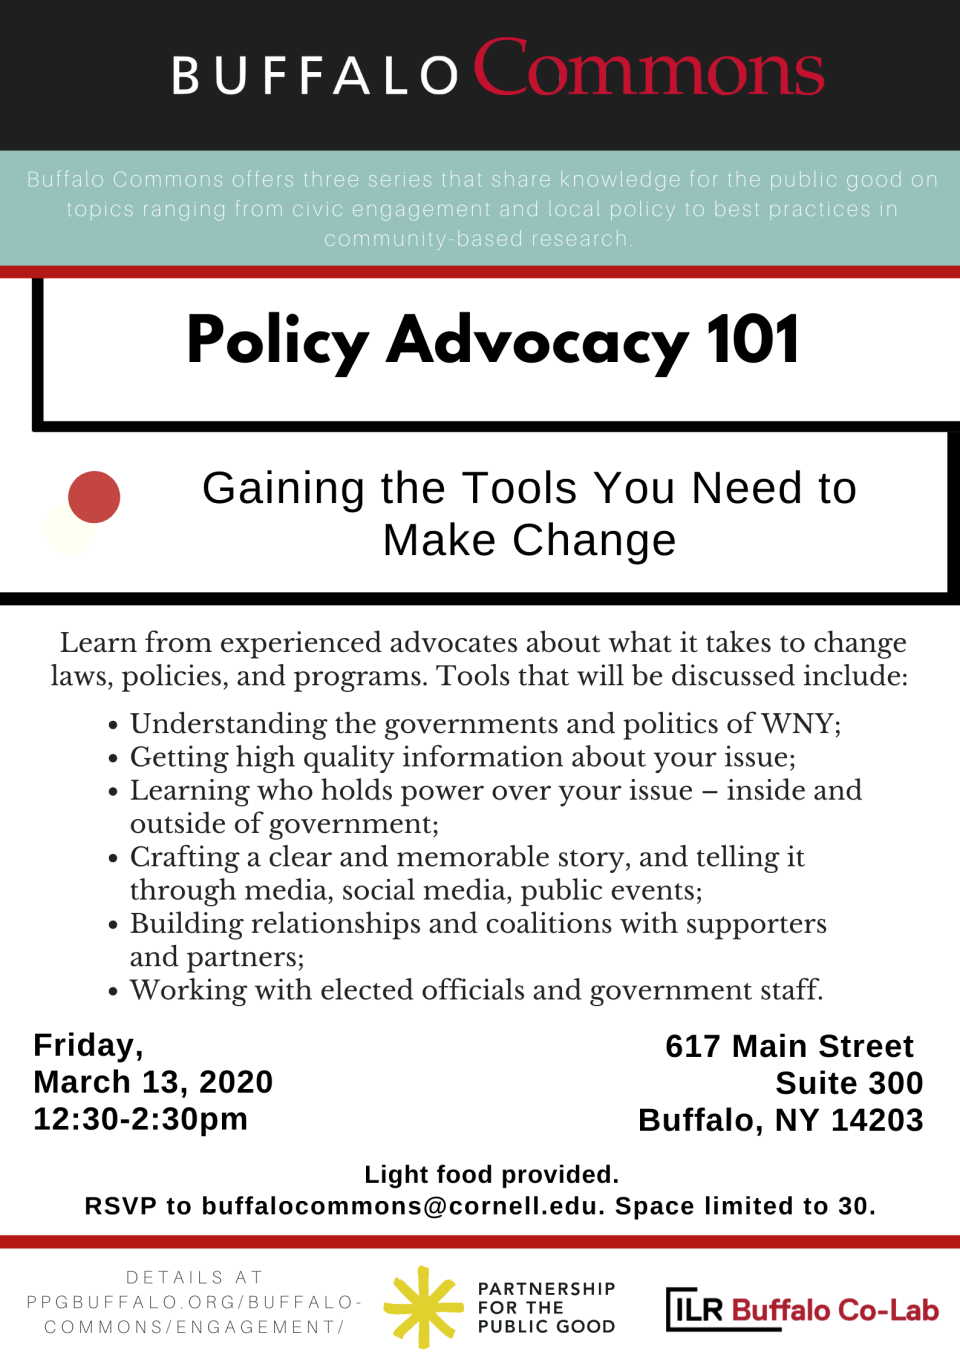 Buffalo Commons Workshop: Policy Advocacy 101